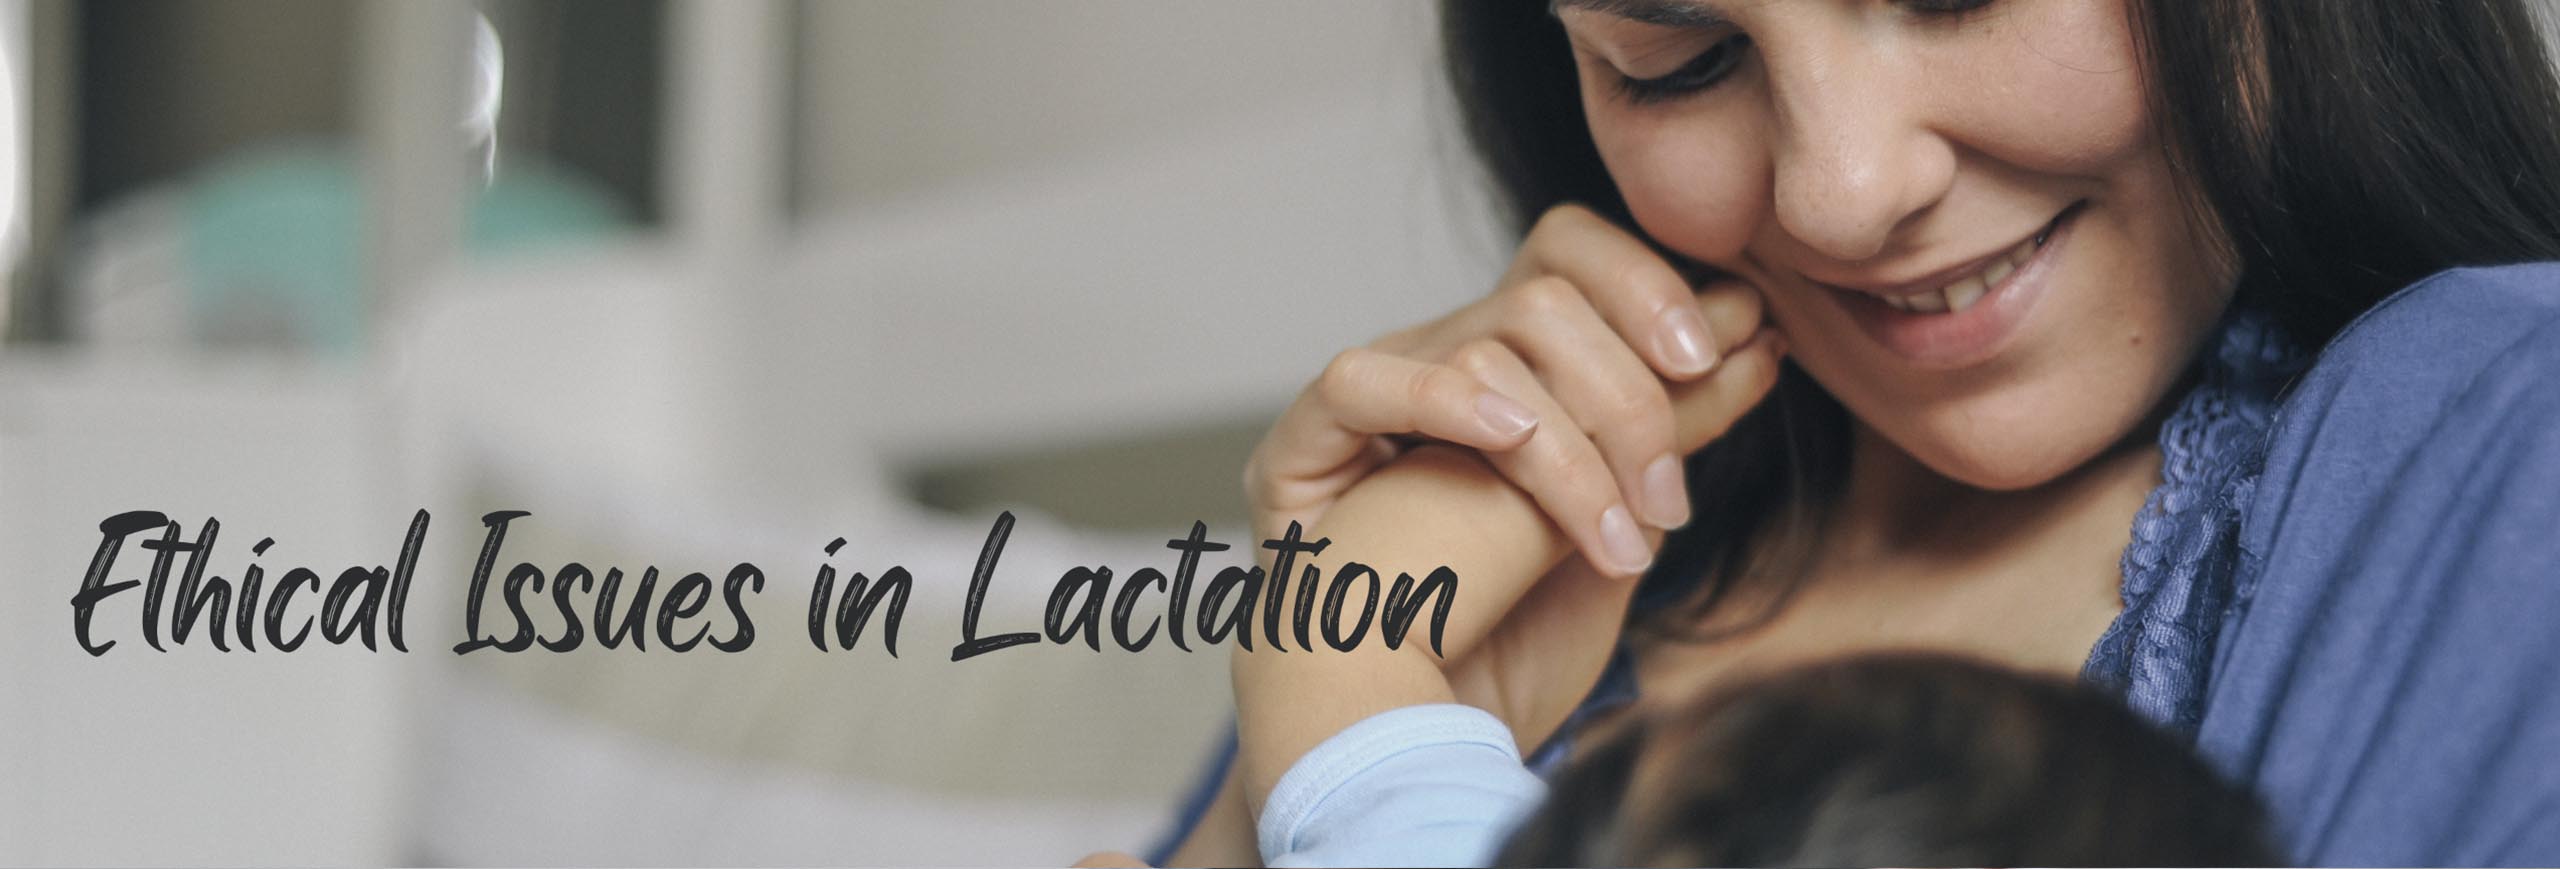 Ethical Issues in Lactation